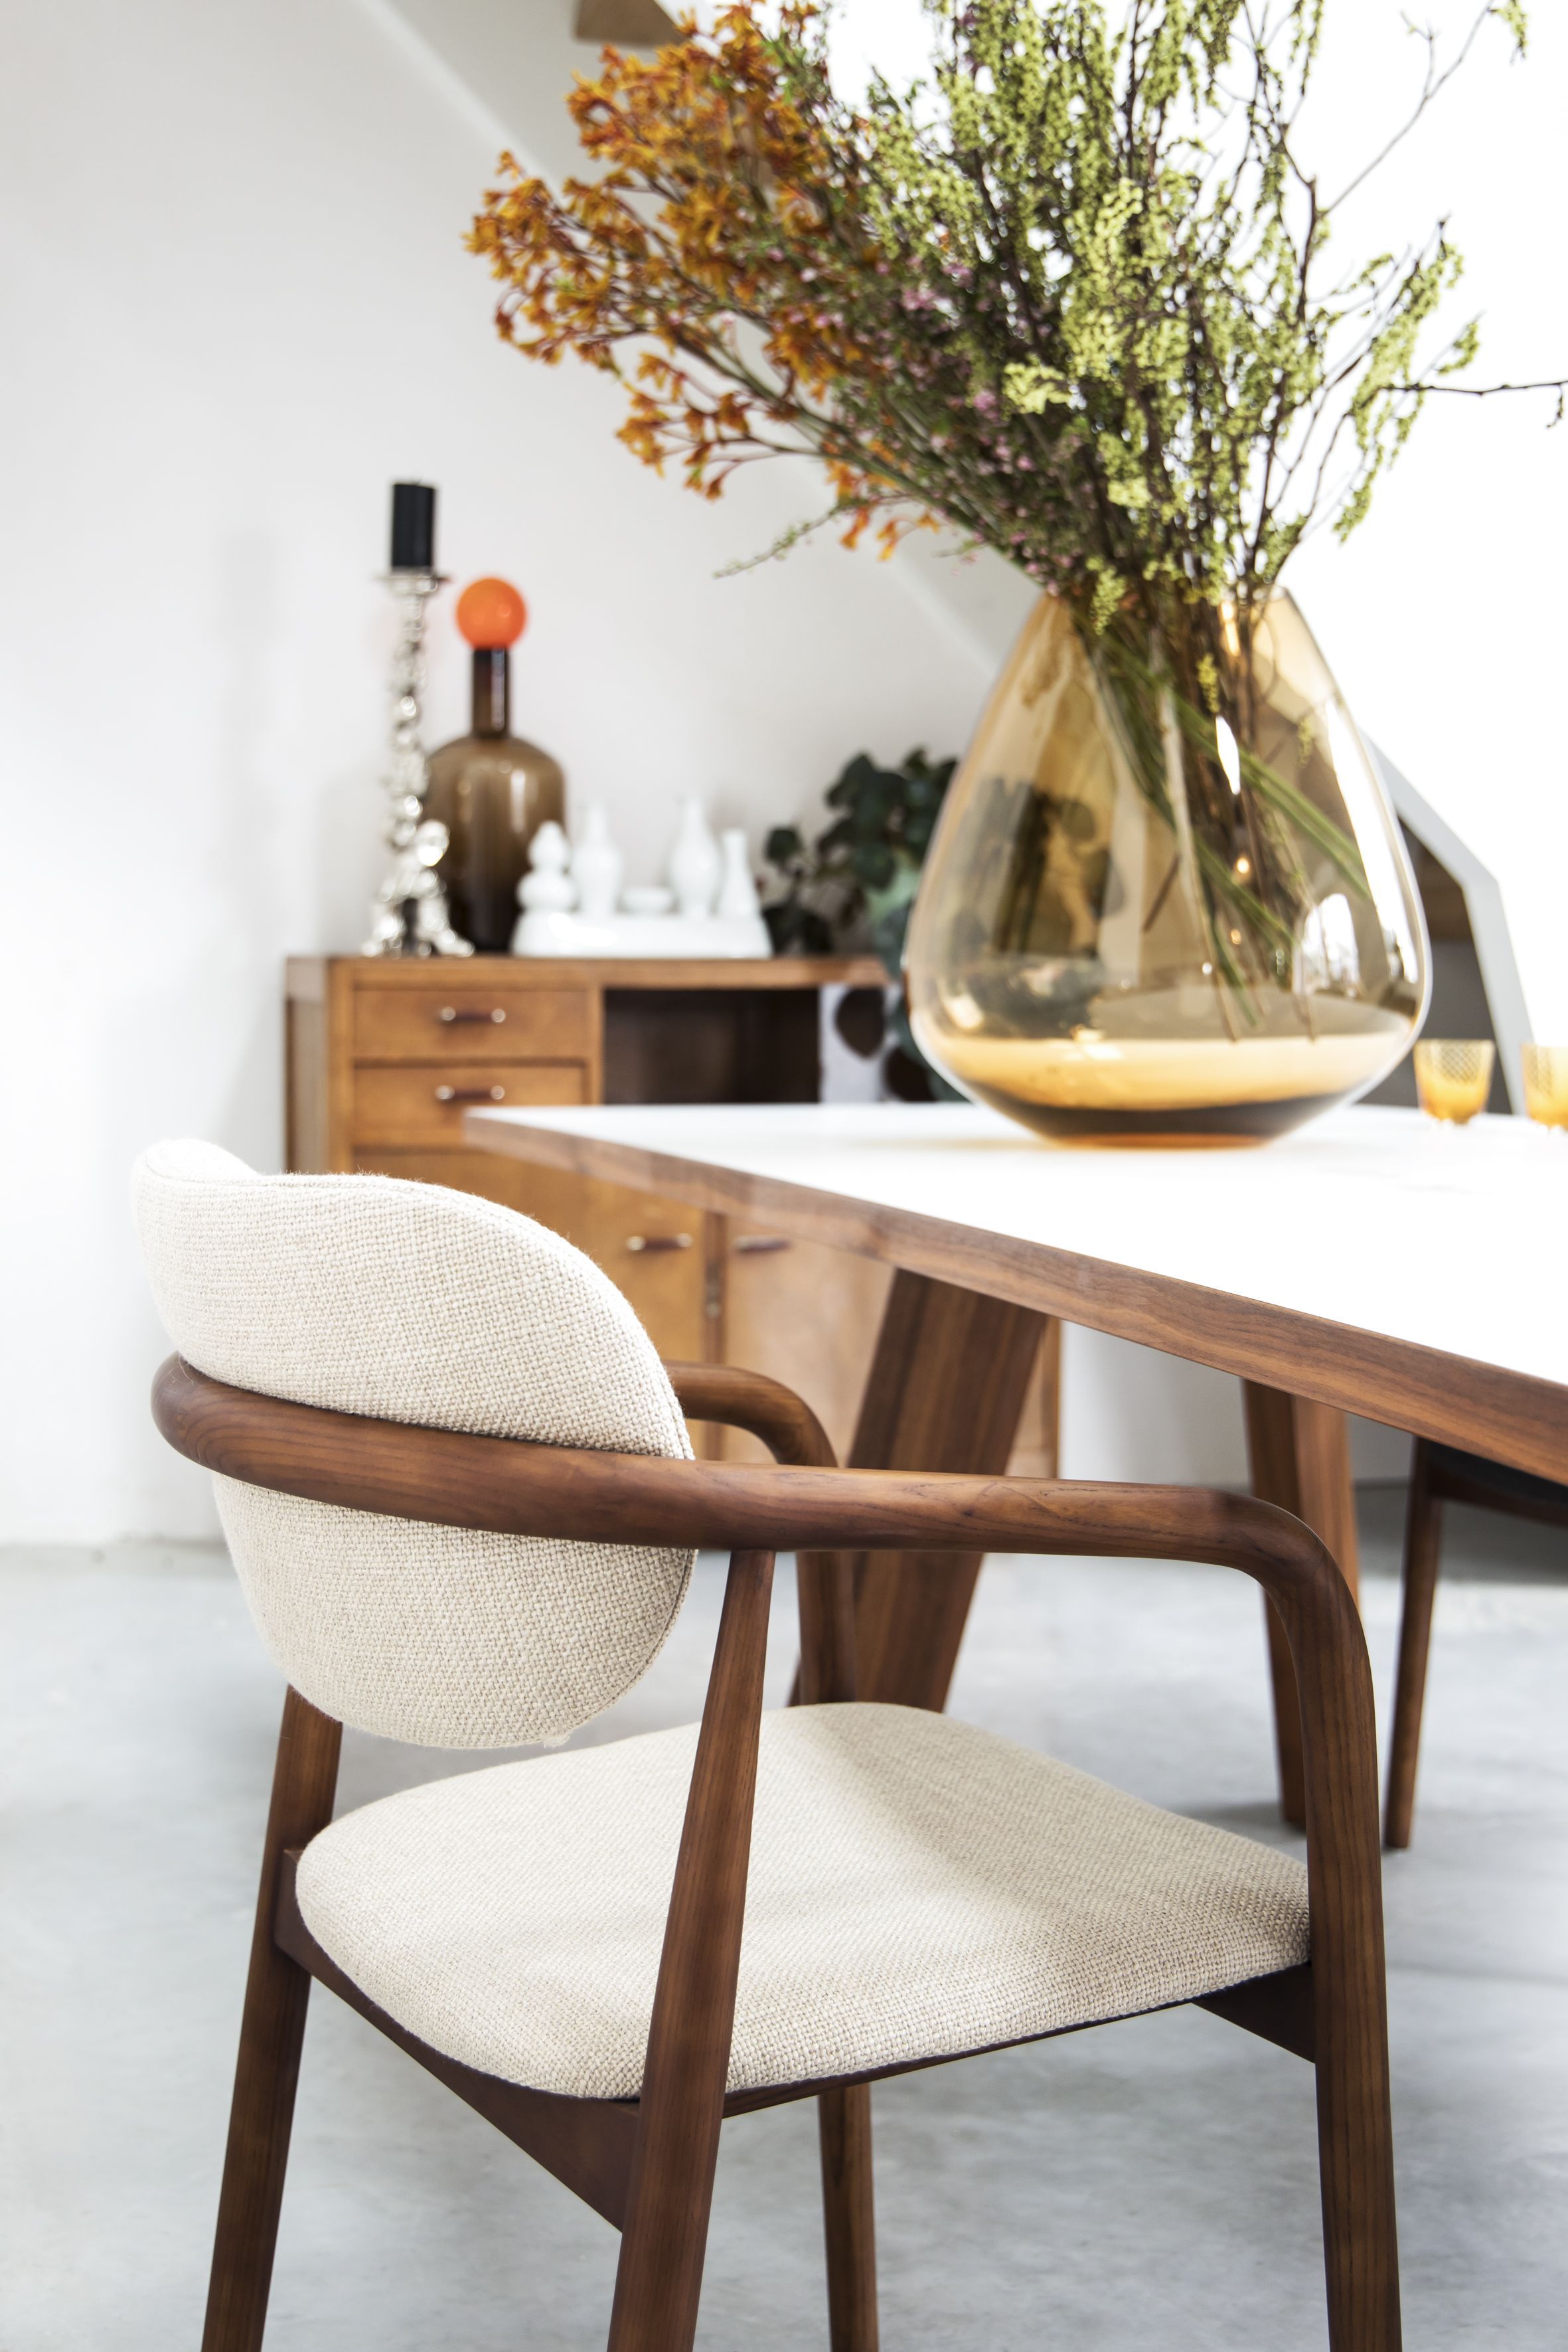 Henry by Pols Potten Chair